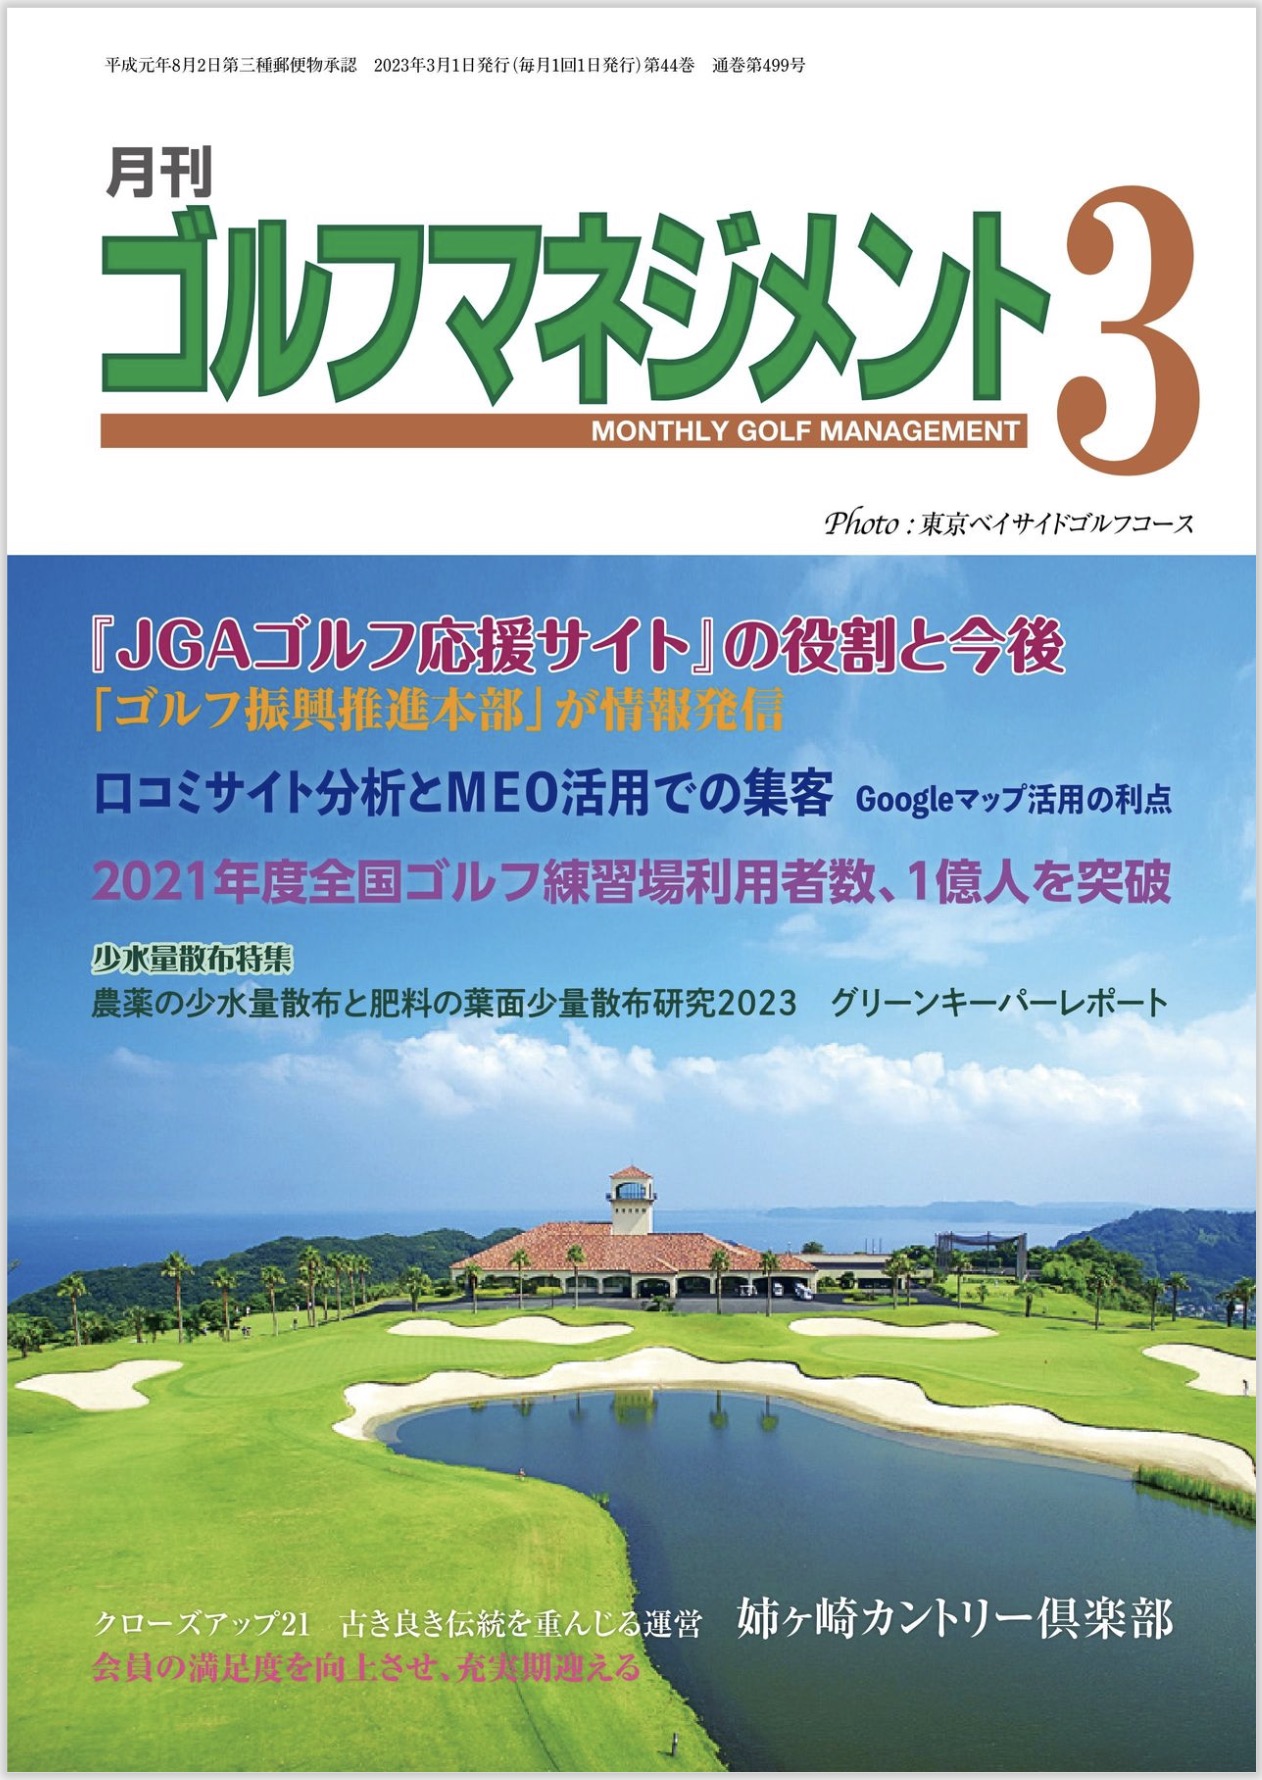 monthly-golf-management2023031